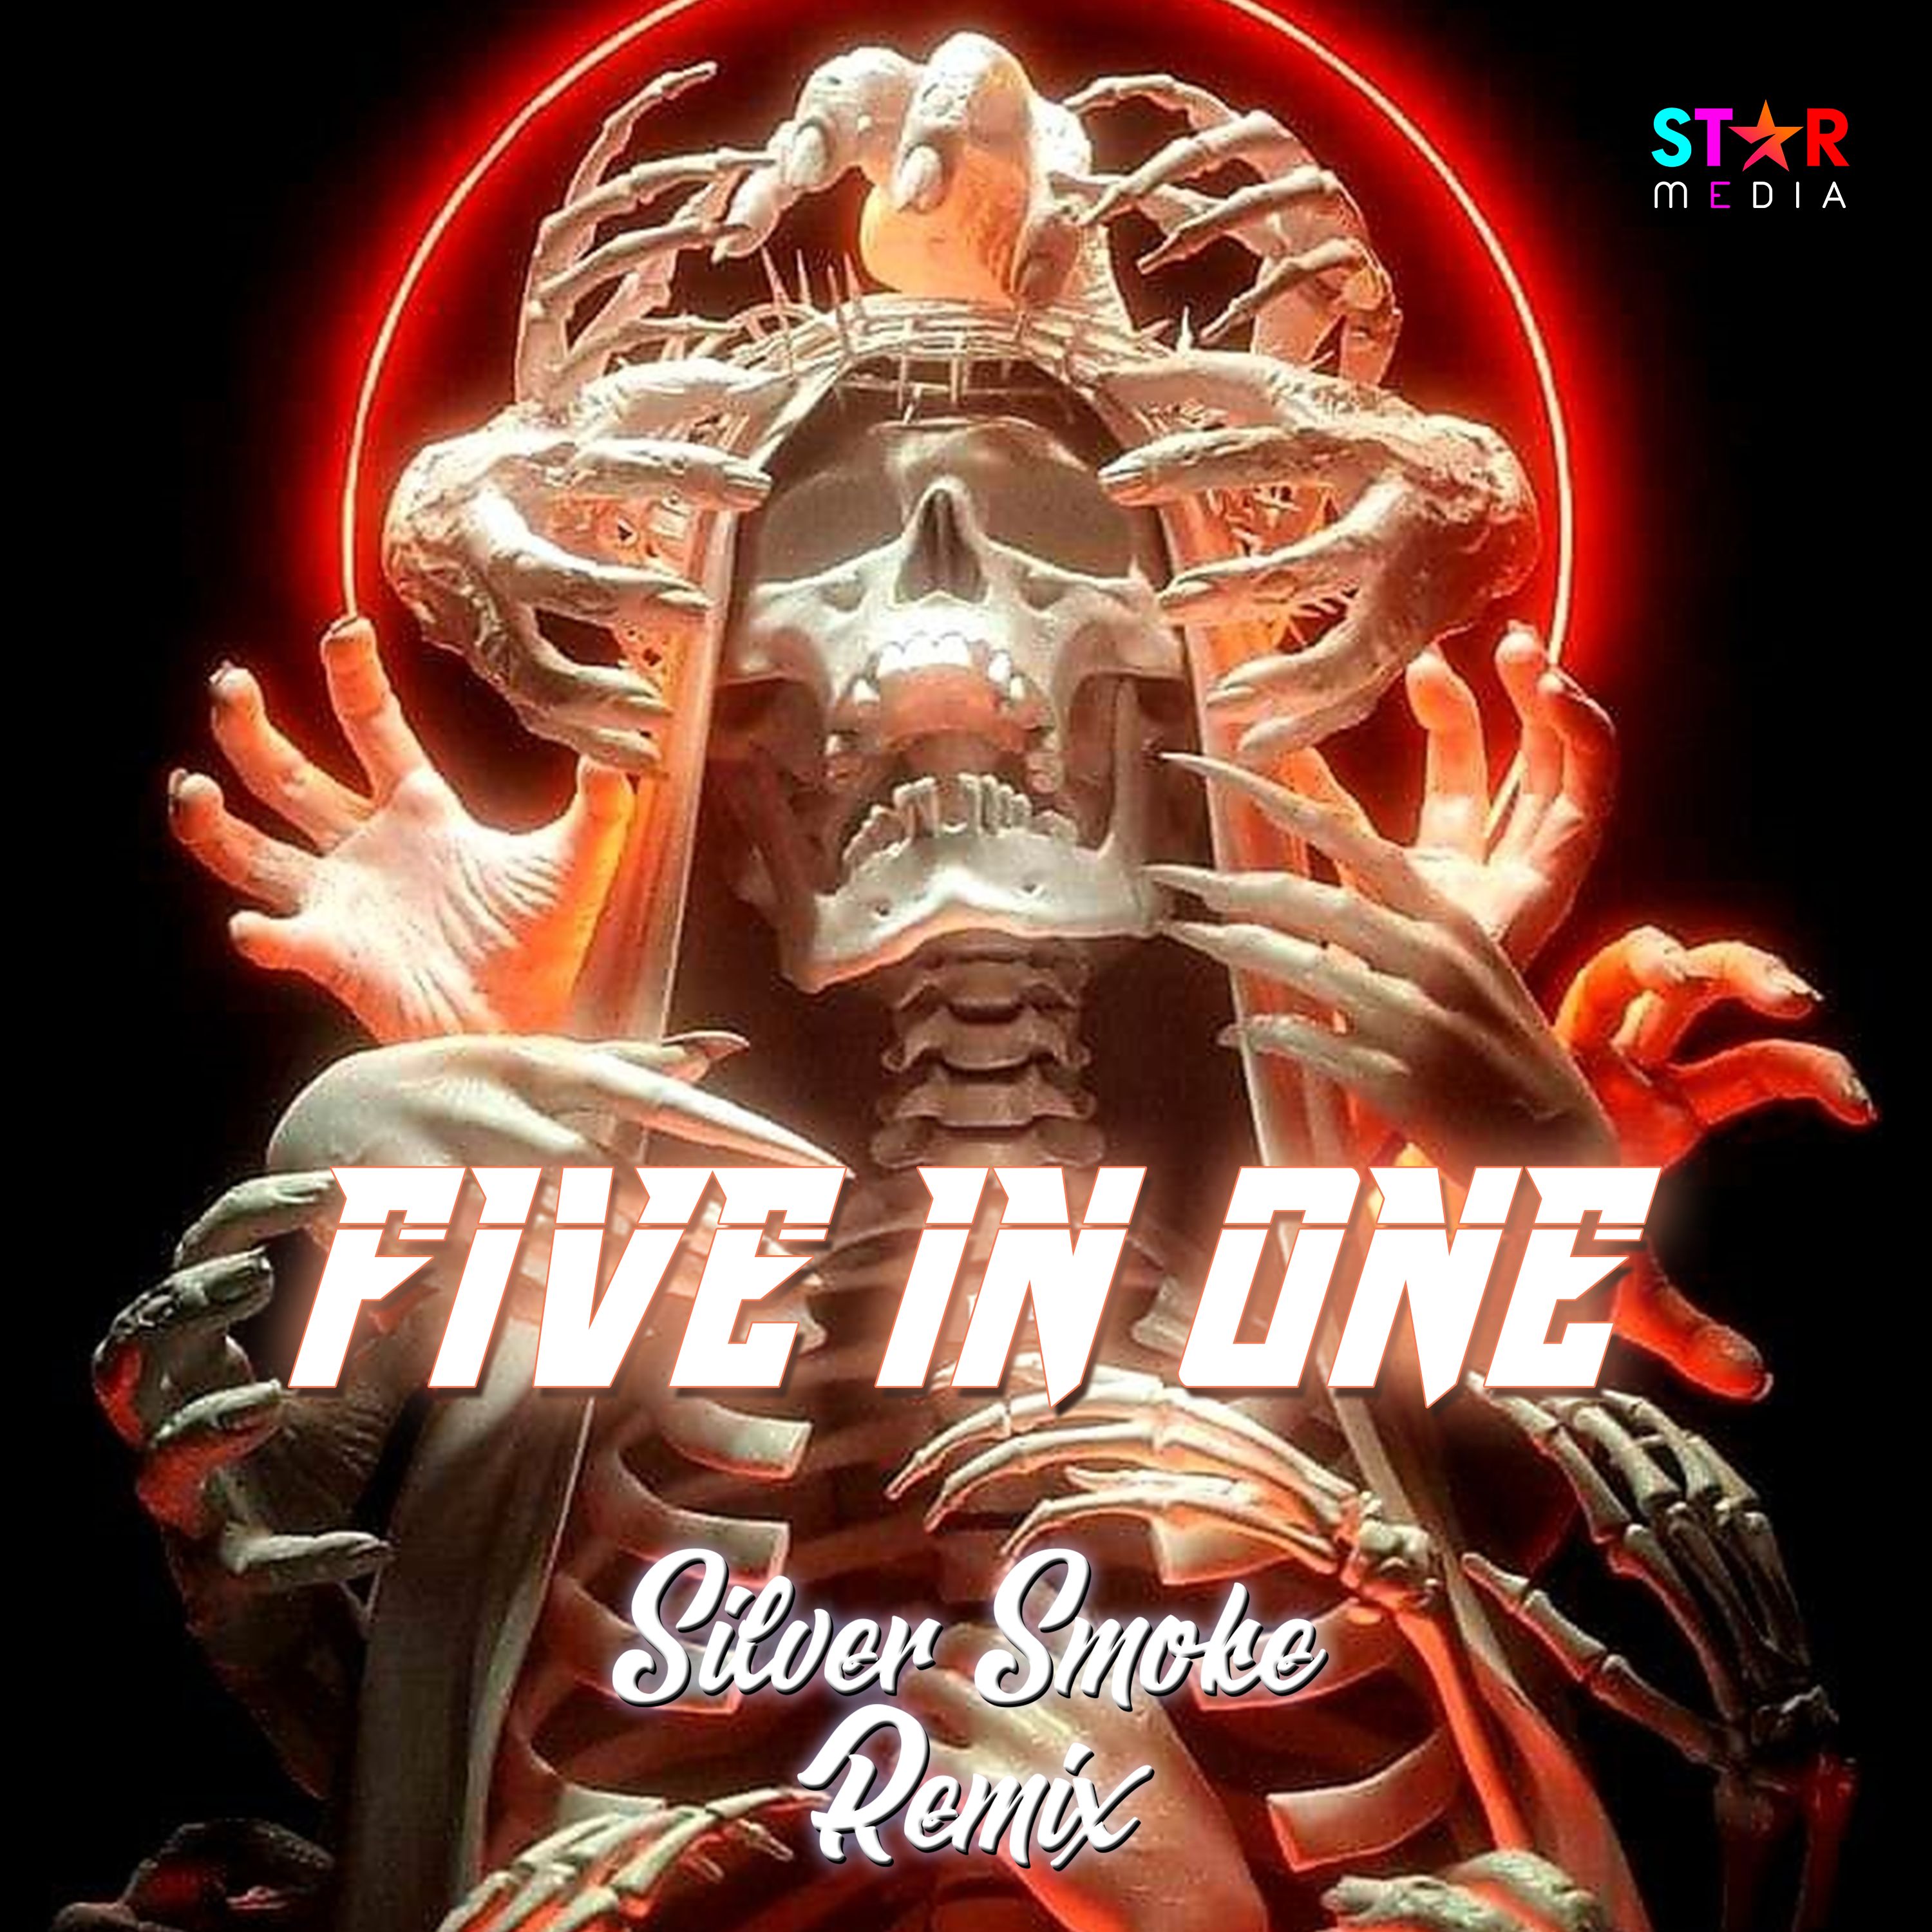 Aflaai 5 IN 1 - SILVER SMOKE REMIX (Out Out,The Magic Key,Butterfly,Party Started,Bóng Tối Trước Bình Minh)